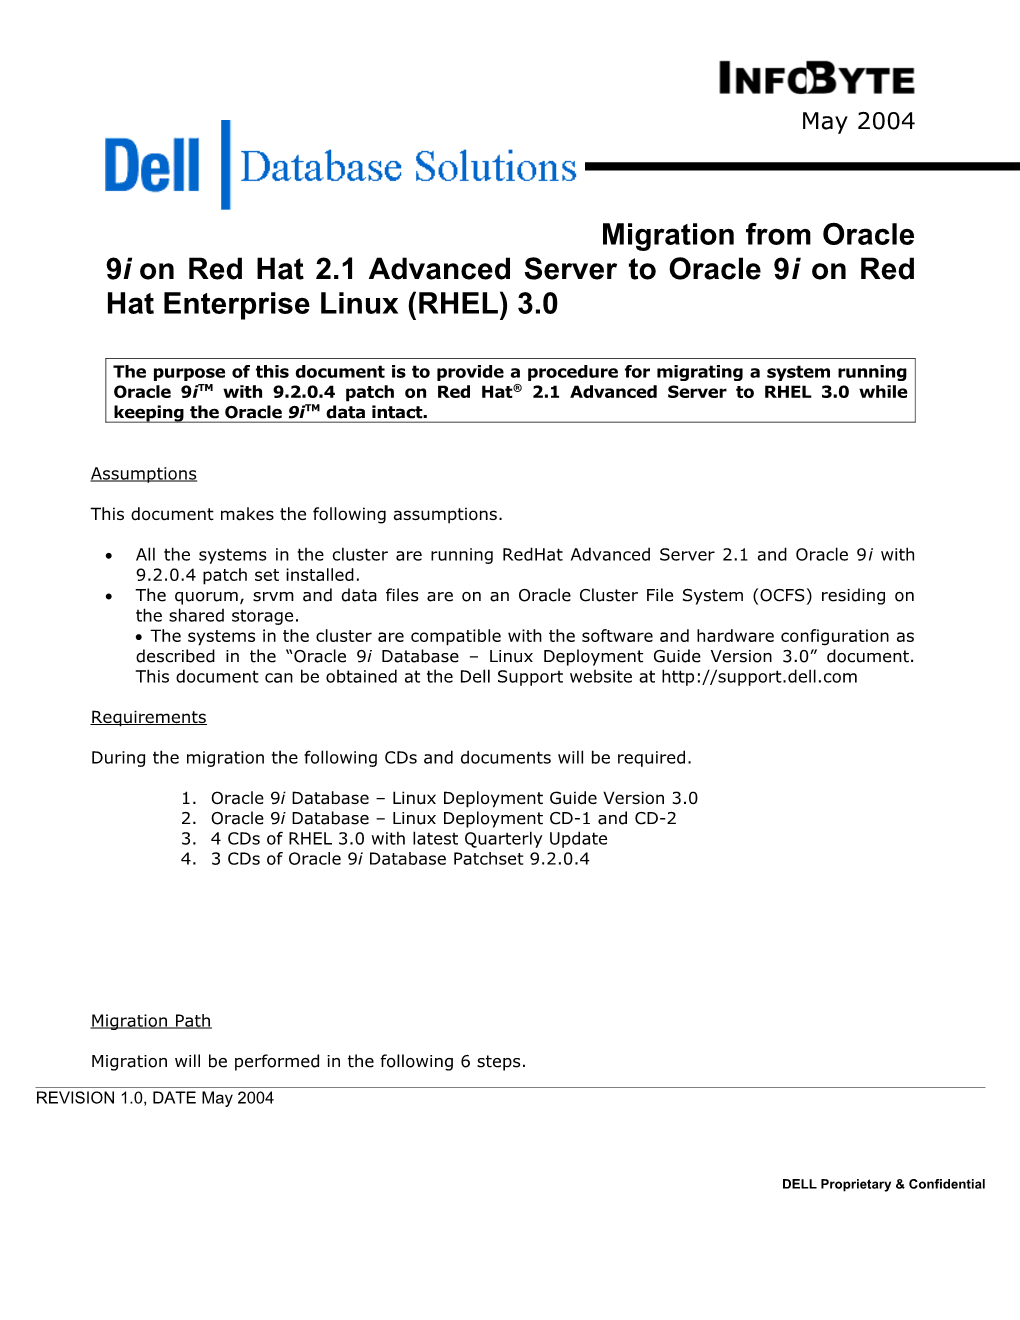 Migration from Oracle 9Itm on Red Hat 2.1 Advanced Server to Oracle 9Itm on Red Hat Enterprise